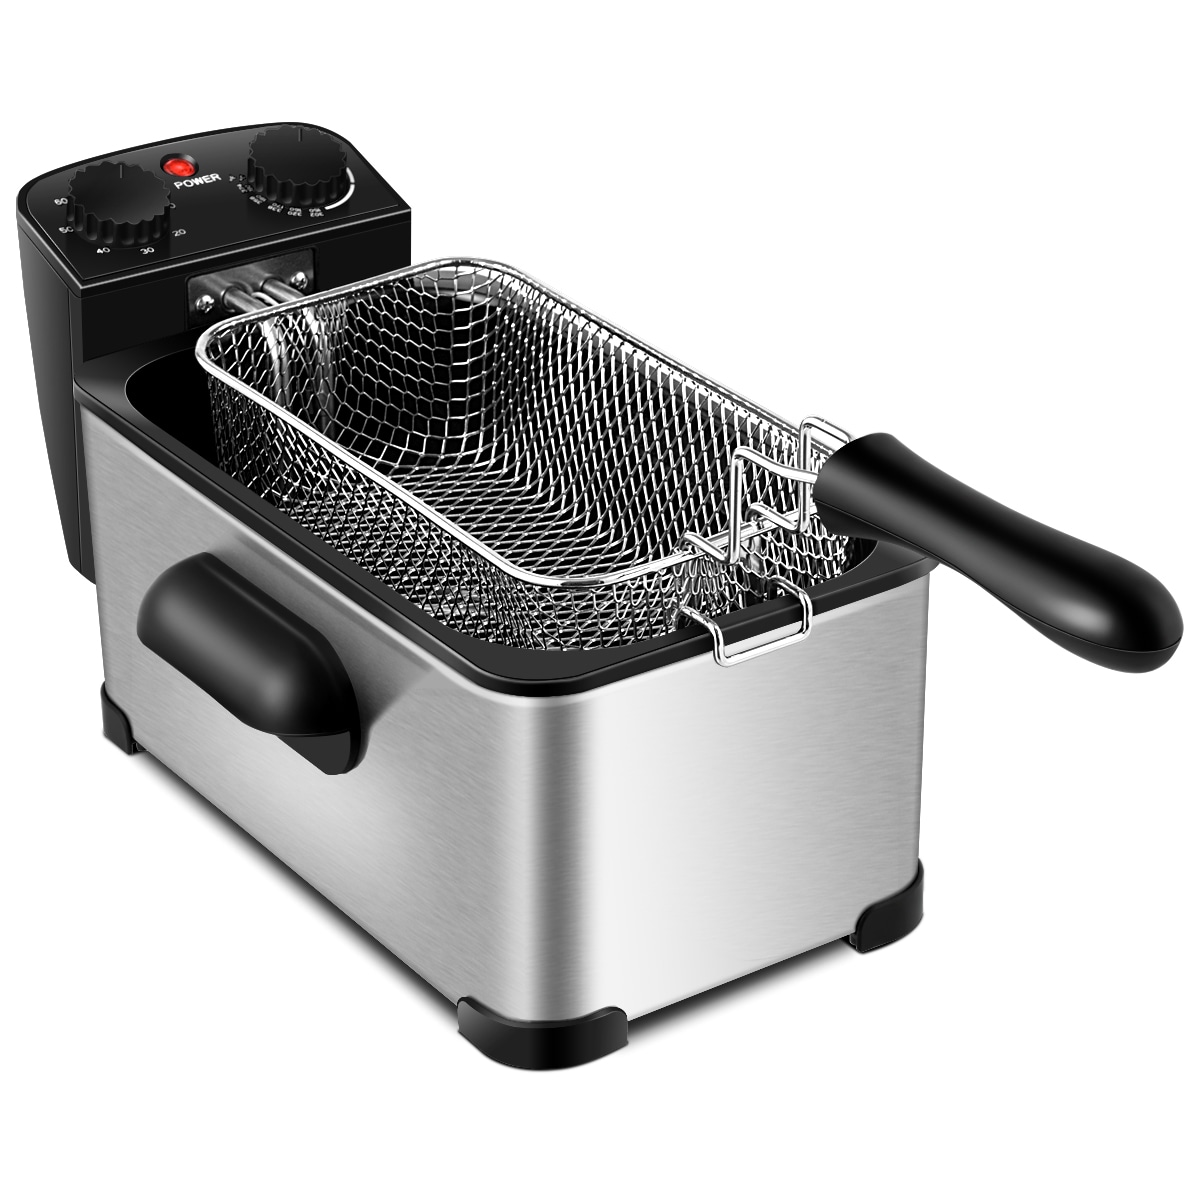 Non Stick Chip Pan Deep Fat Fryer Cooking Pot Frying Basket With Lid Universal 